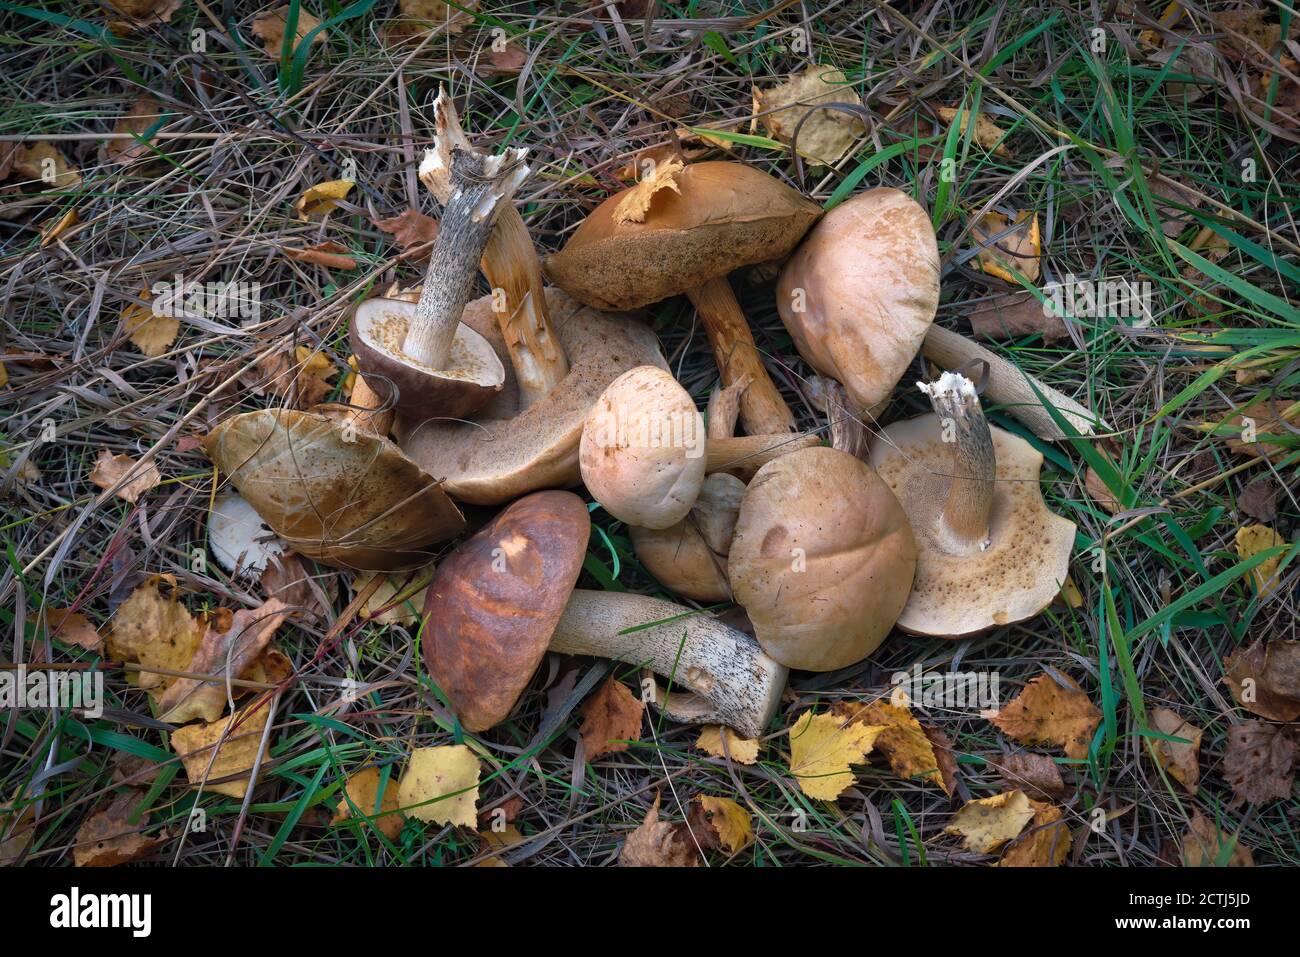 A bunch of freshly picked edible forest mushrooms on a ground covered with fallen leaves. Stock Photo